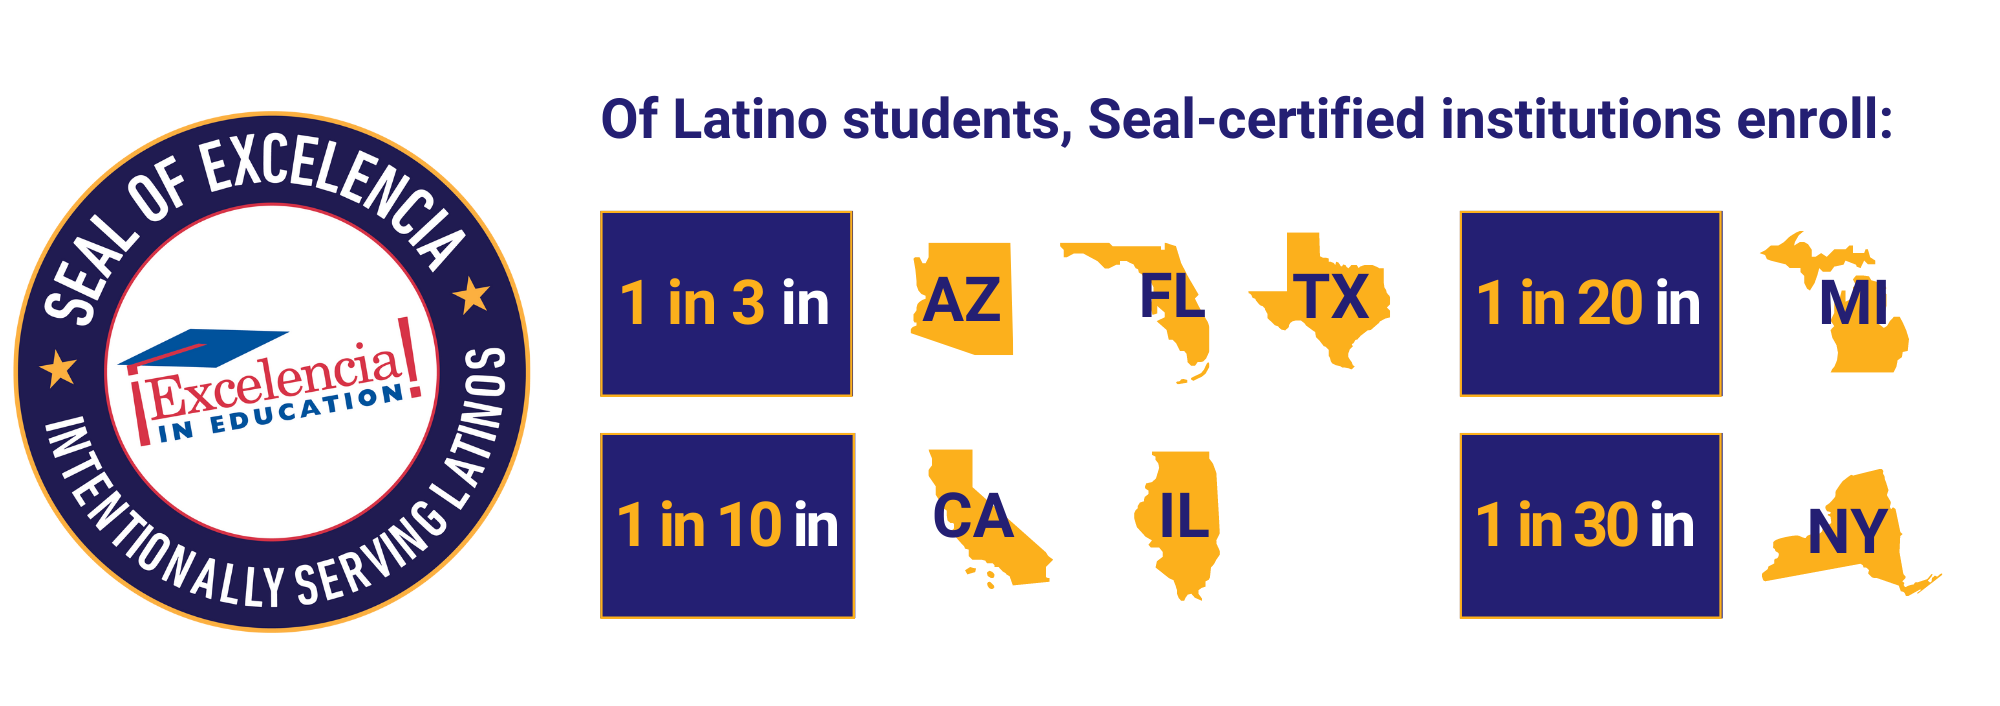 Of Latino students, Seal-certified institutions enroll: 1 in 3 in AZ, FL, and TX, 1 in 10 in CA and IL, 1 in 20 in MI, and 1 in 30 in NY.